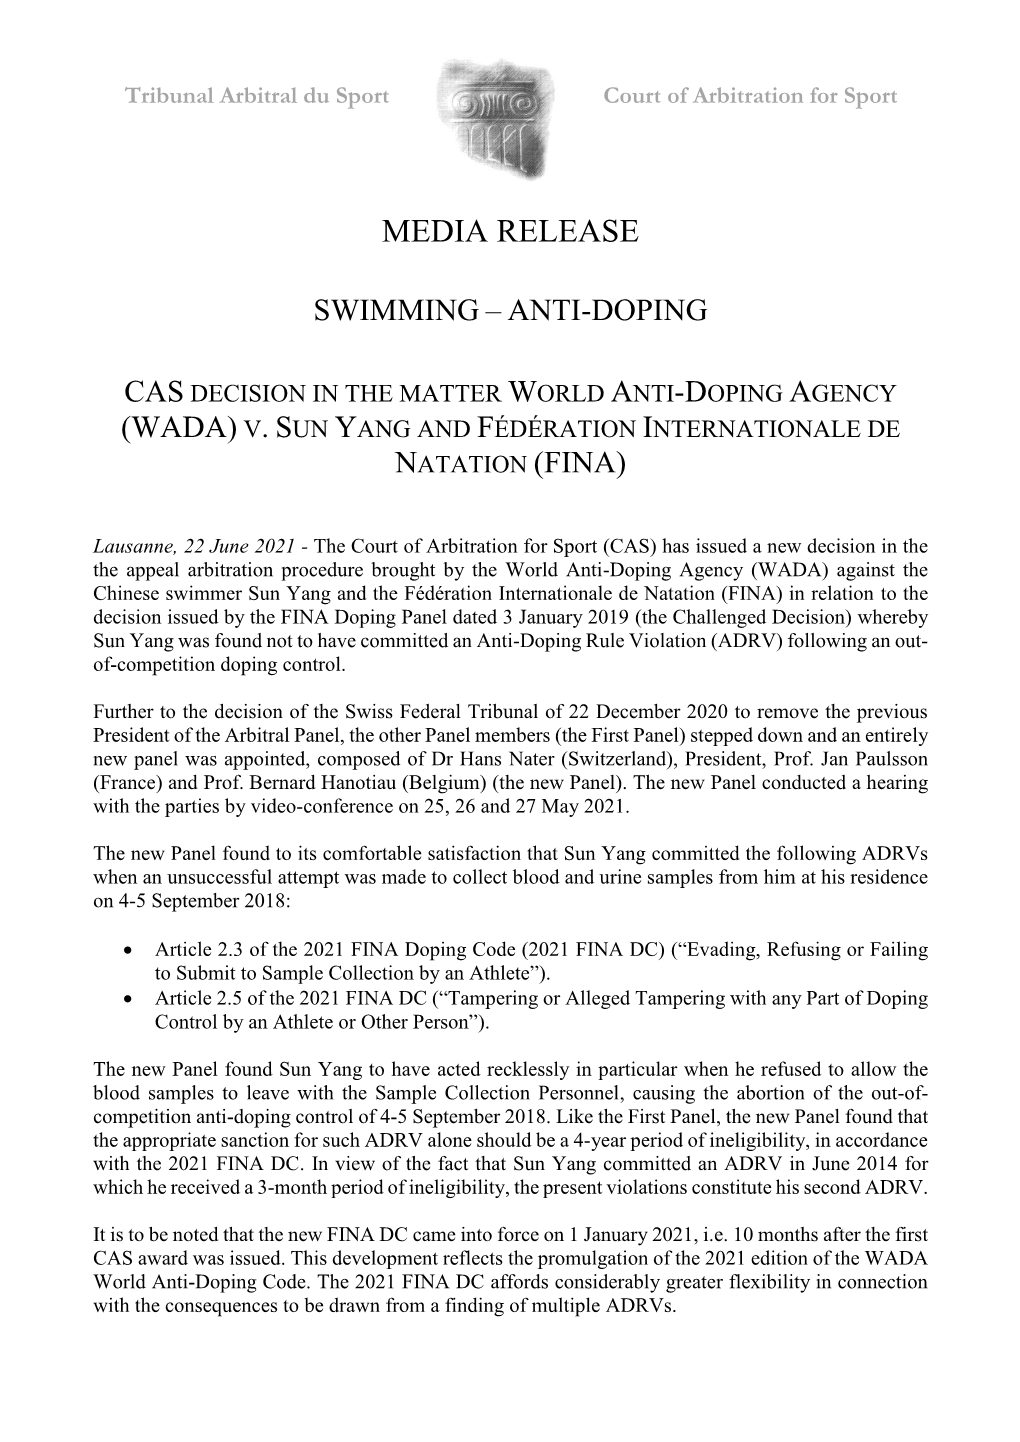 CAS Decision in the Matter WADA V. Sun Yang and FINA